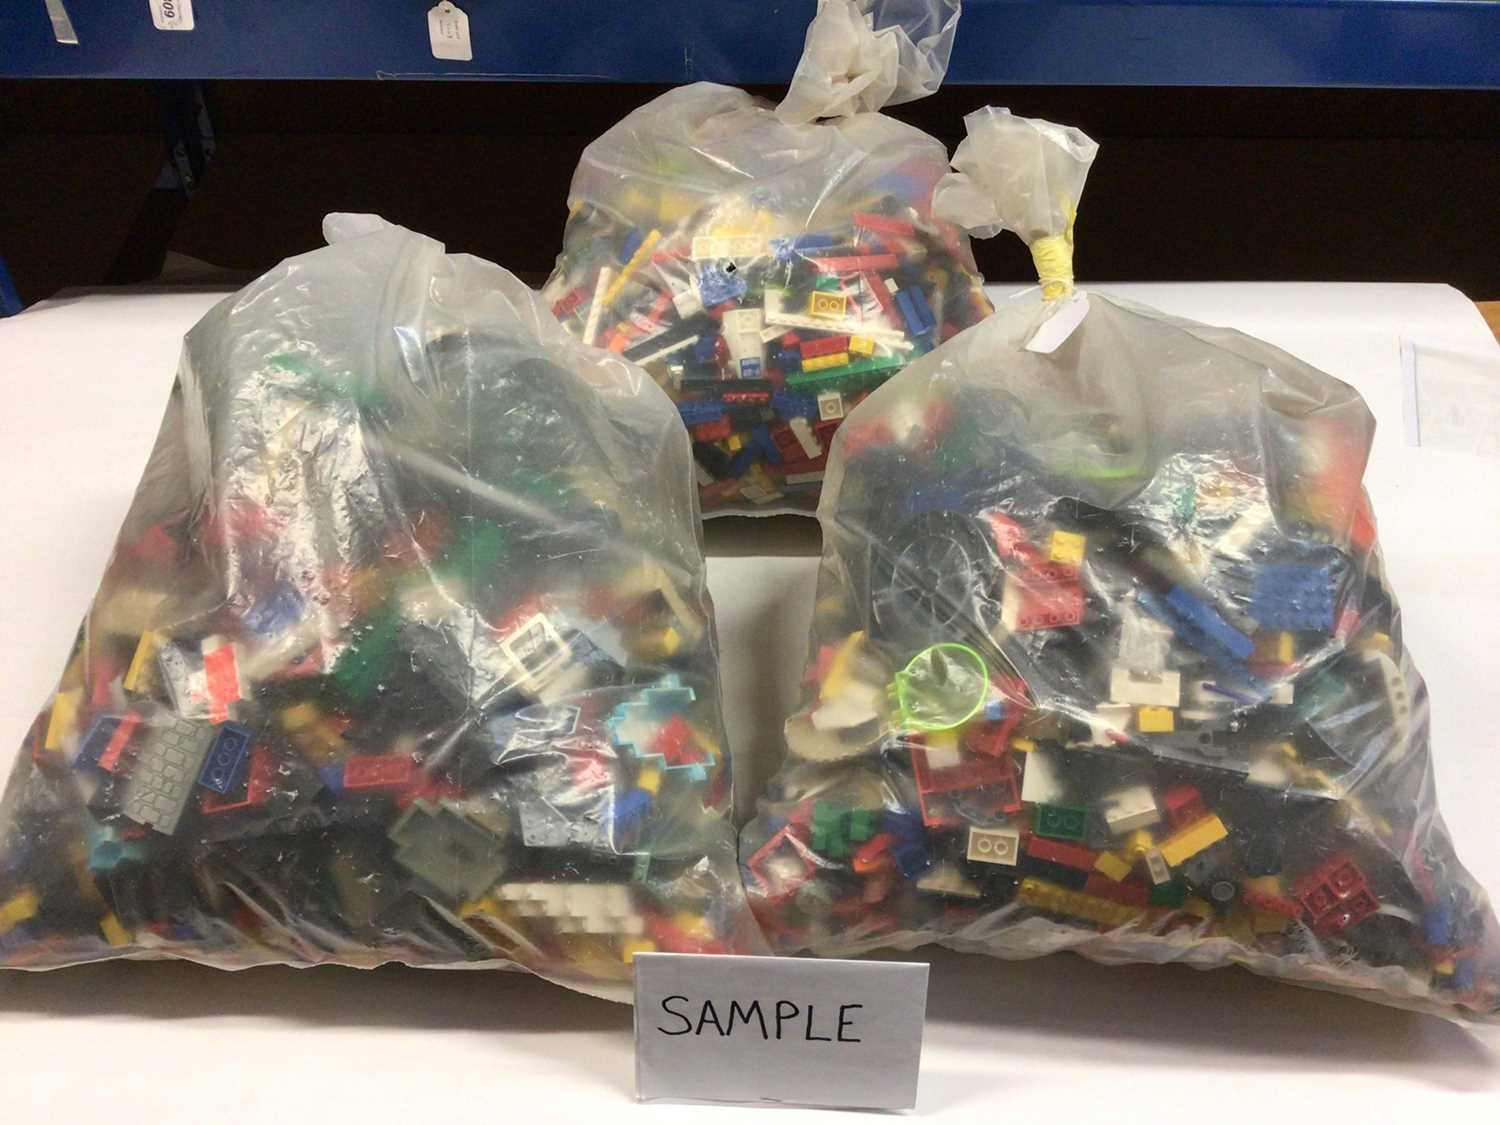 Lot 90 - Three bags of assorted mixed Lego bricks and accessories, weighing approx 15 Kg in total